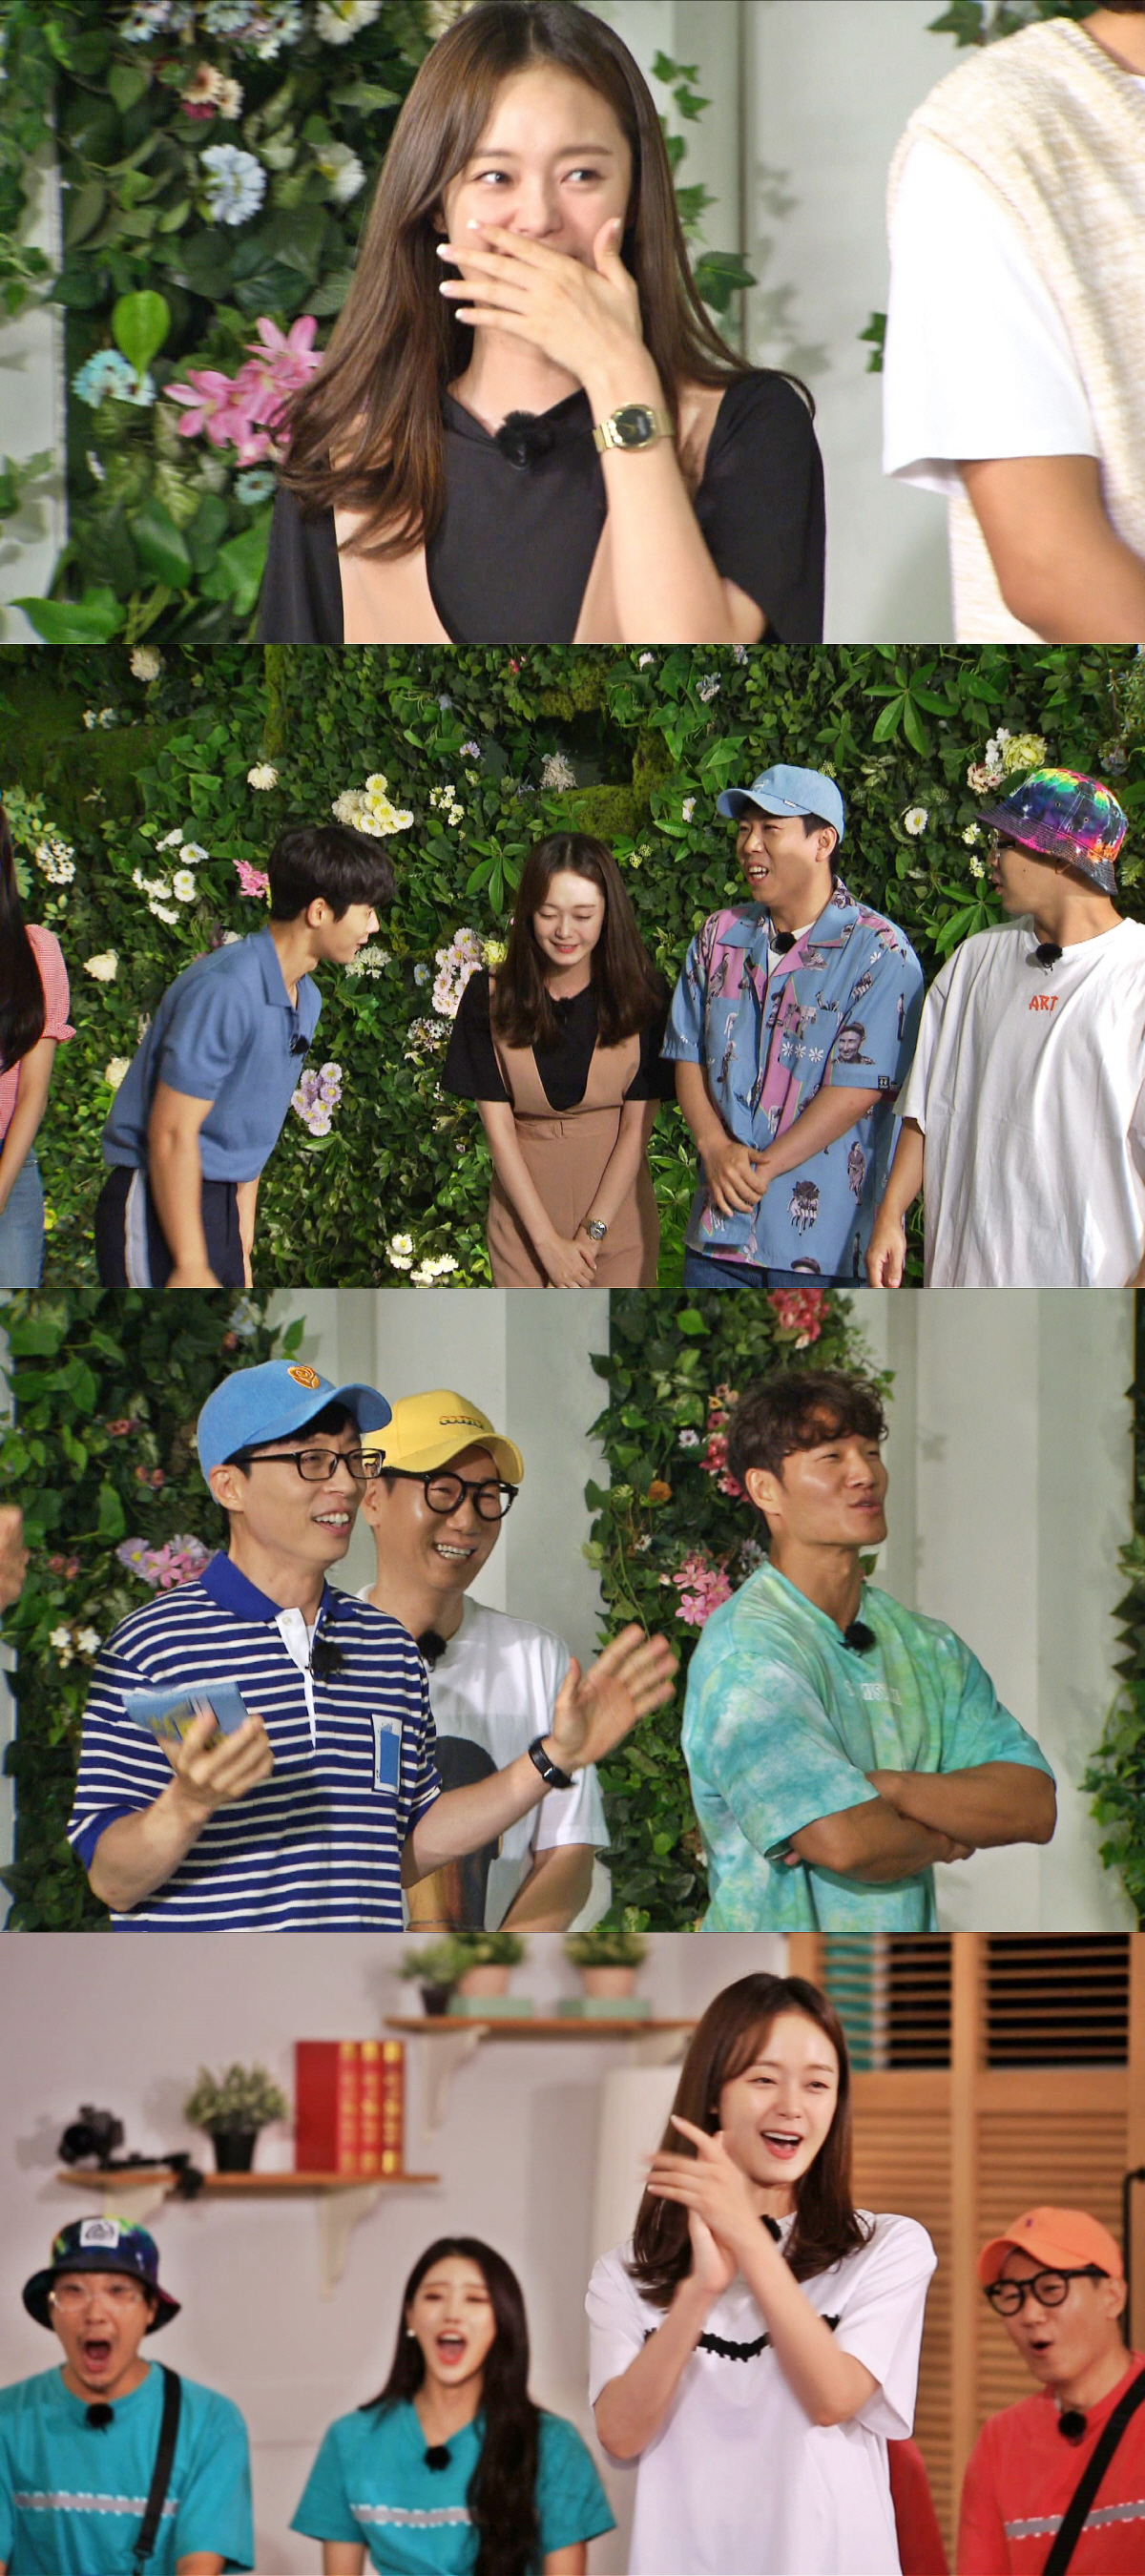 On SBS Running Man, which is broadcasted on the 26th (Sun), the figure of Jeon So-min, who transformed from Doll Somin to My Fair Lady, will be revealed.In the recent recording of Running Man, members of Lovelys Americas, Wikimiki Kim Do Yeon, (woman) childrens rainy season, and Izuwon Jang Won Young appeared and received cheers from the members.Then, when Kim Dong-jun appeared, the smile of Jeon So-min was constant.Jeon So-min showed a feminine appearance in front of Kim Dong-jun, shyly handing over his hair, and the members who played the game watched all of Jeon So-mins actions, saying, Look at the overturn of Jeon So-mins head. Im so excited about-min teasing.Jeon So-min is dating now, and the endless Jeon So-min mall continued, and Jeon So-min said, Please stay still.The steamy brother chemistry of the members who are in love with Jeon So-min teasing can be found on Running Man which is broadcasted at 5 pm on Sunday 26th.